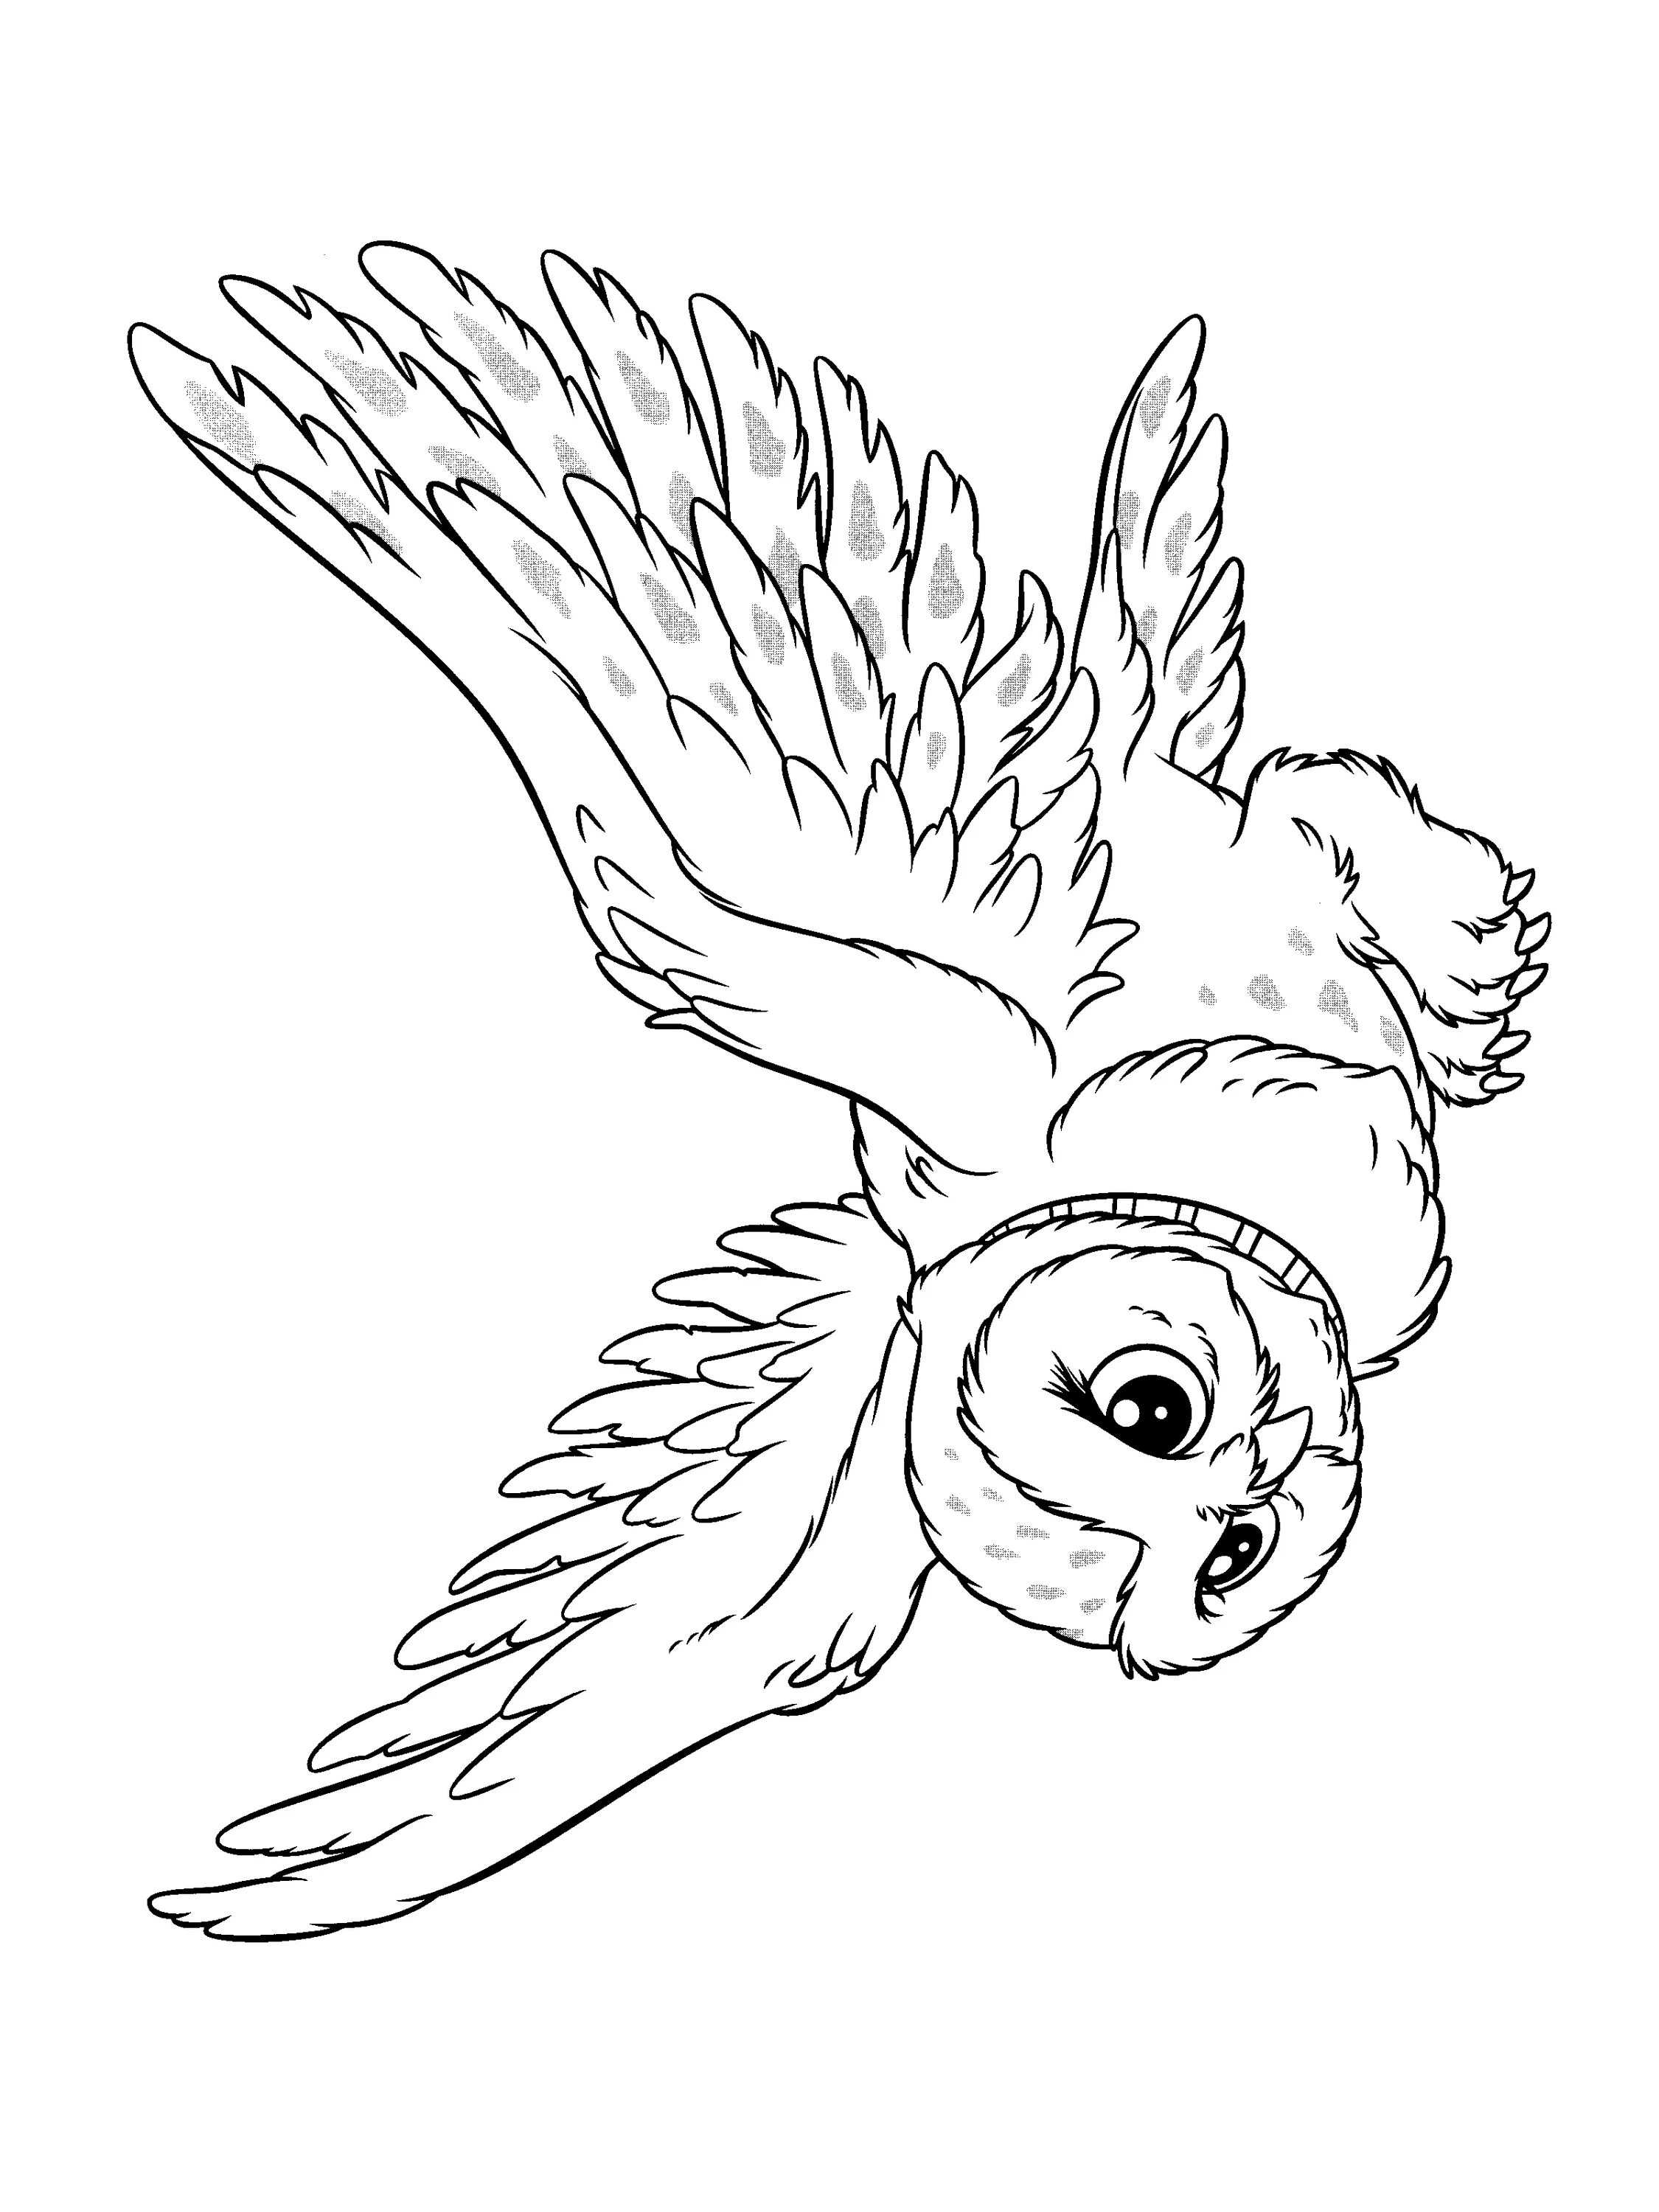 Great coloring hedwig owl